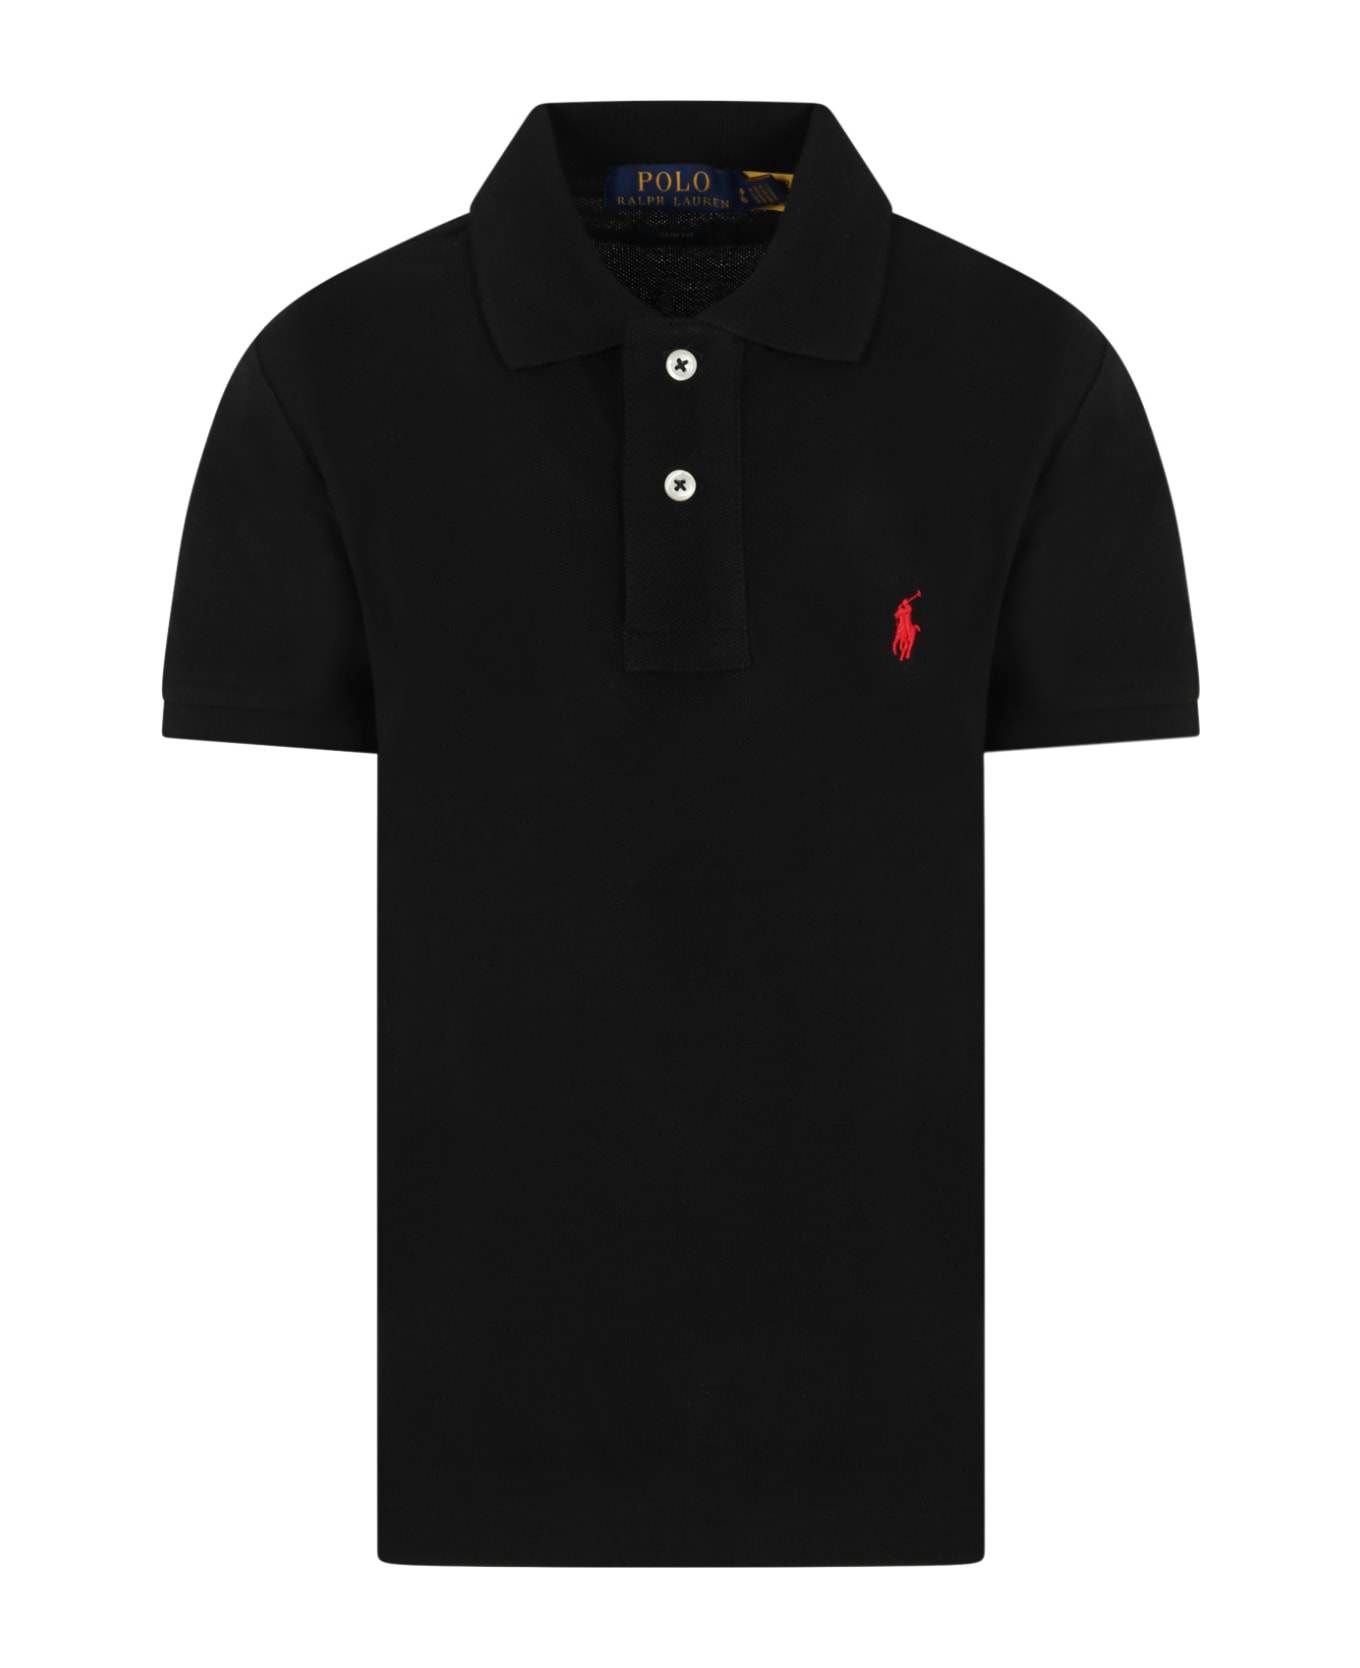 Ralph Lauren Black Polo Shirt For Boy With Pony Logo - Black Tシャツ＆ポロシャツ